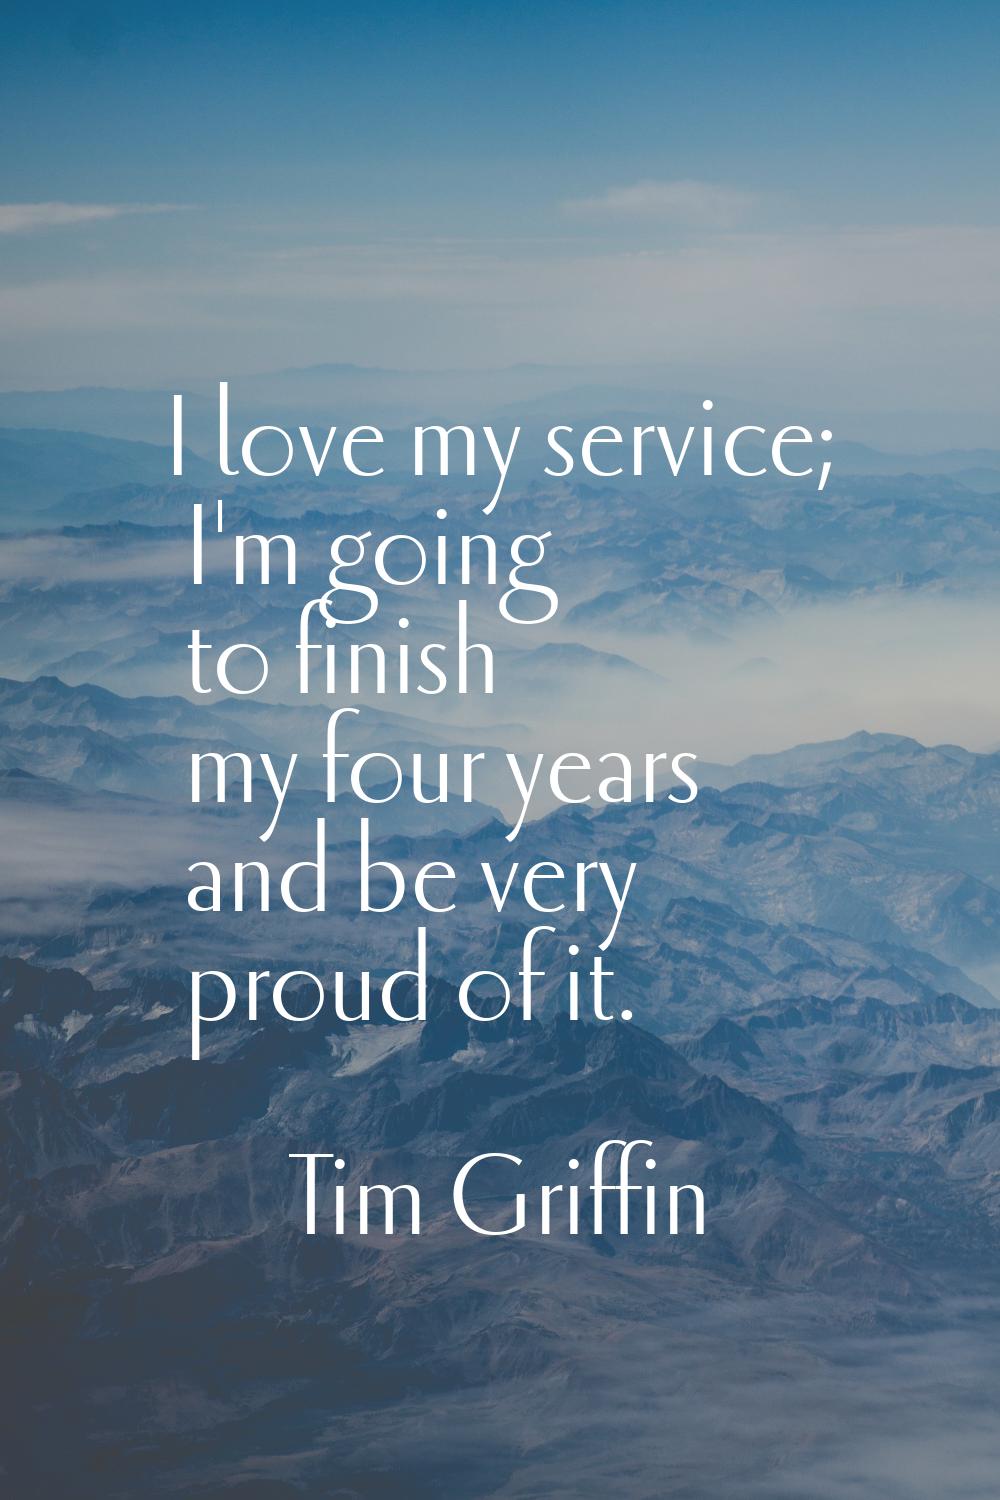 I love my service; I'm going to finish my four years and be very proud of it.